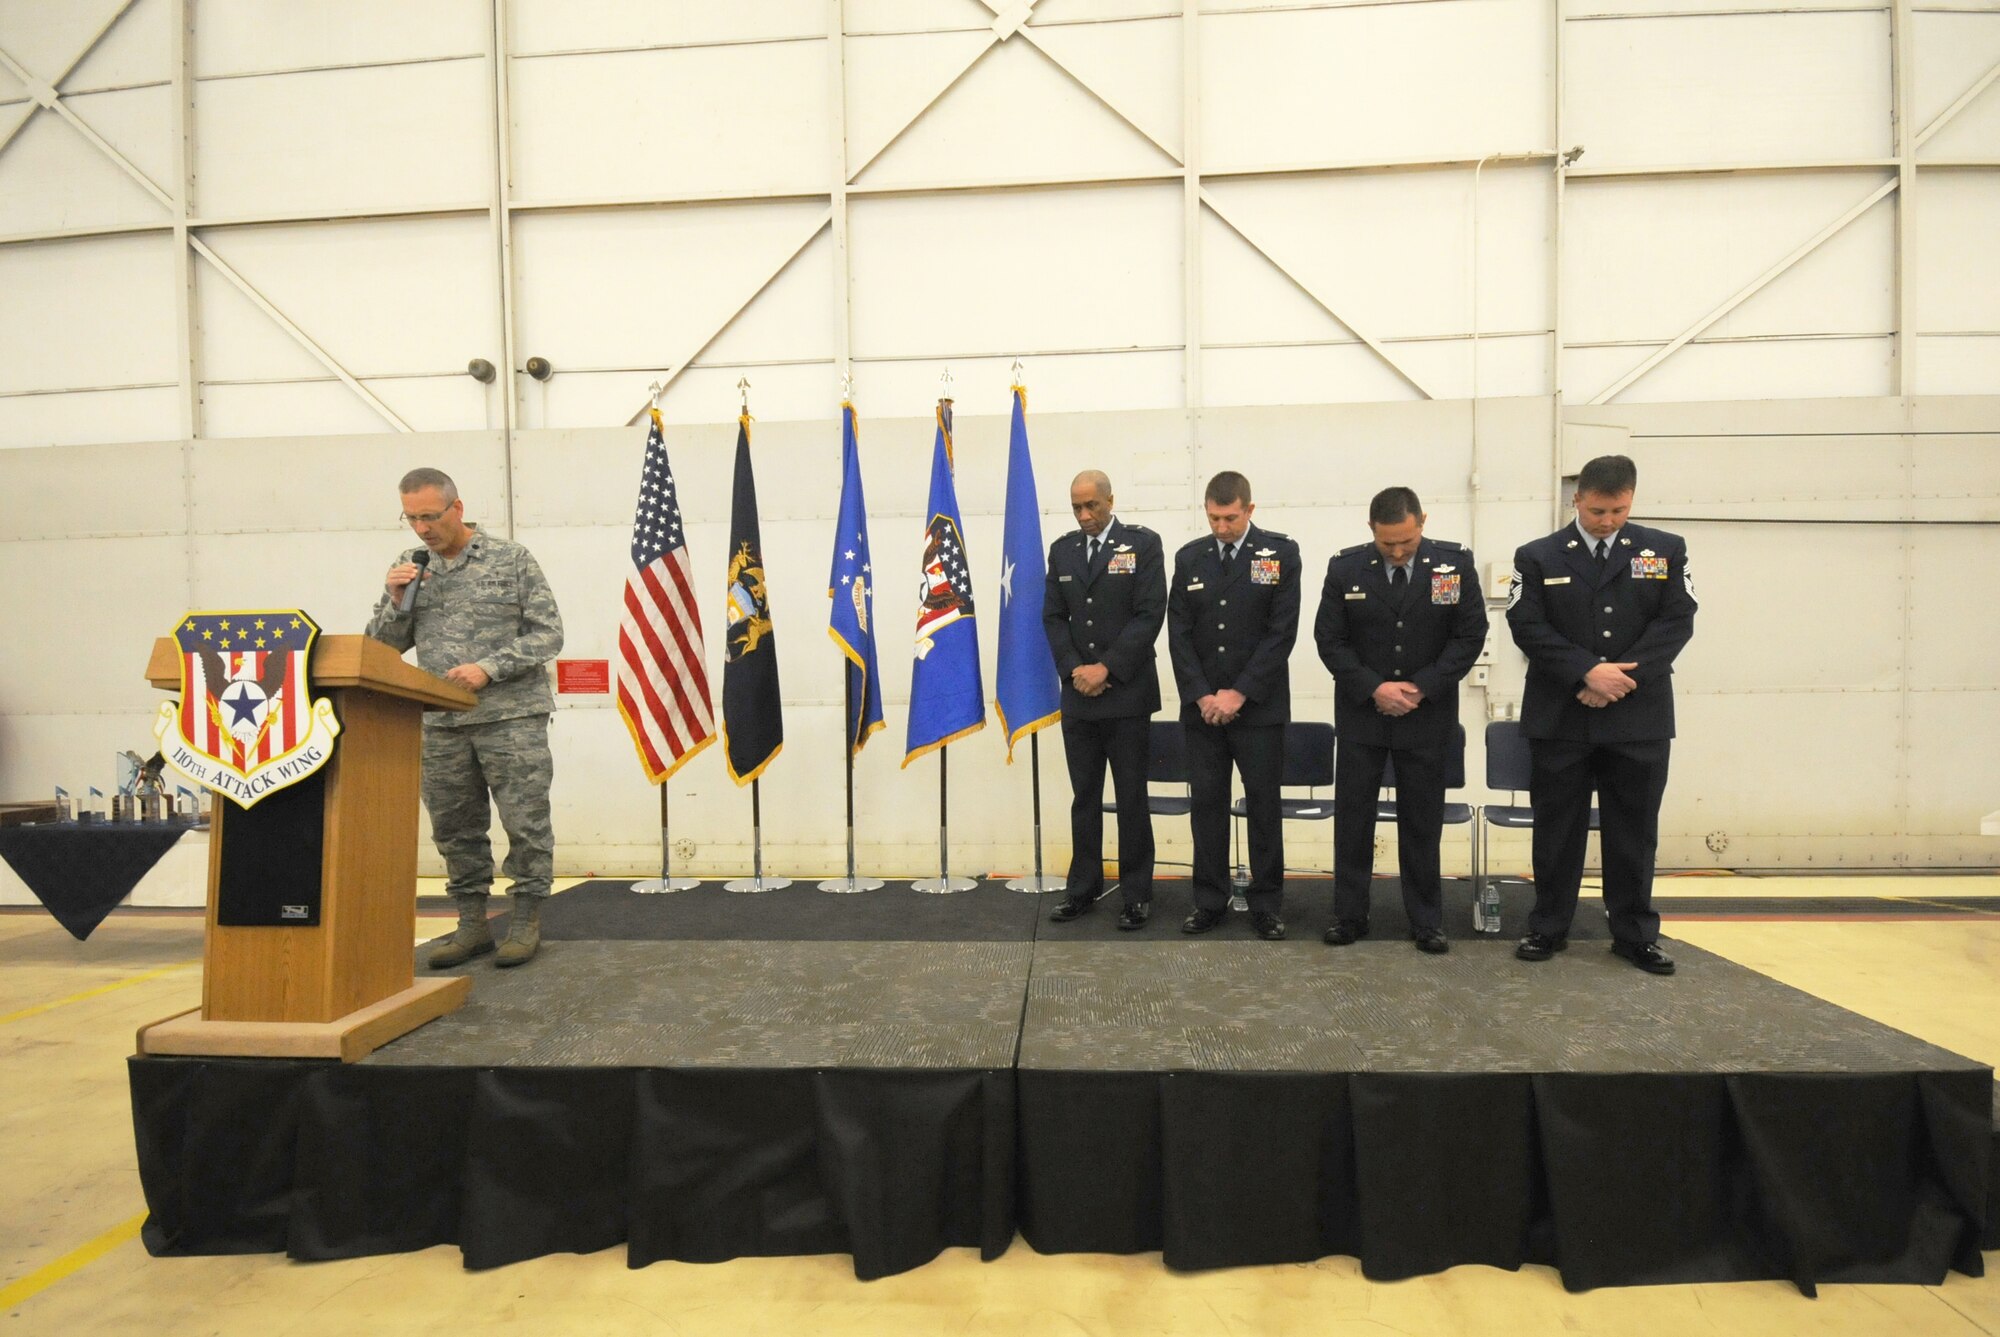 Col. Bryan Teff assumes command of the 110th Attack Wing, Battle Creek Air National Guard Base, Mich., Saturday, December 5, 2015 in the hangar of the Wing. Teff will be taking over the role of commander from Col. Ronald Wilson who has been the wing commander for three years. (Air National Guard Photo by Master Sgt. Sonia Pawloski/released)